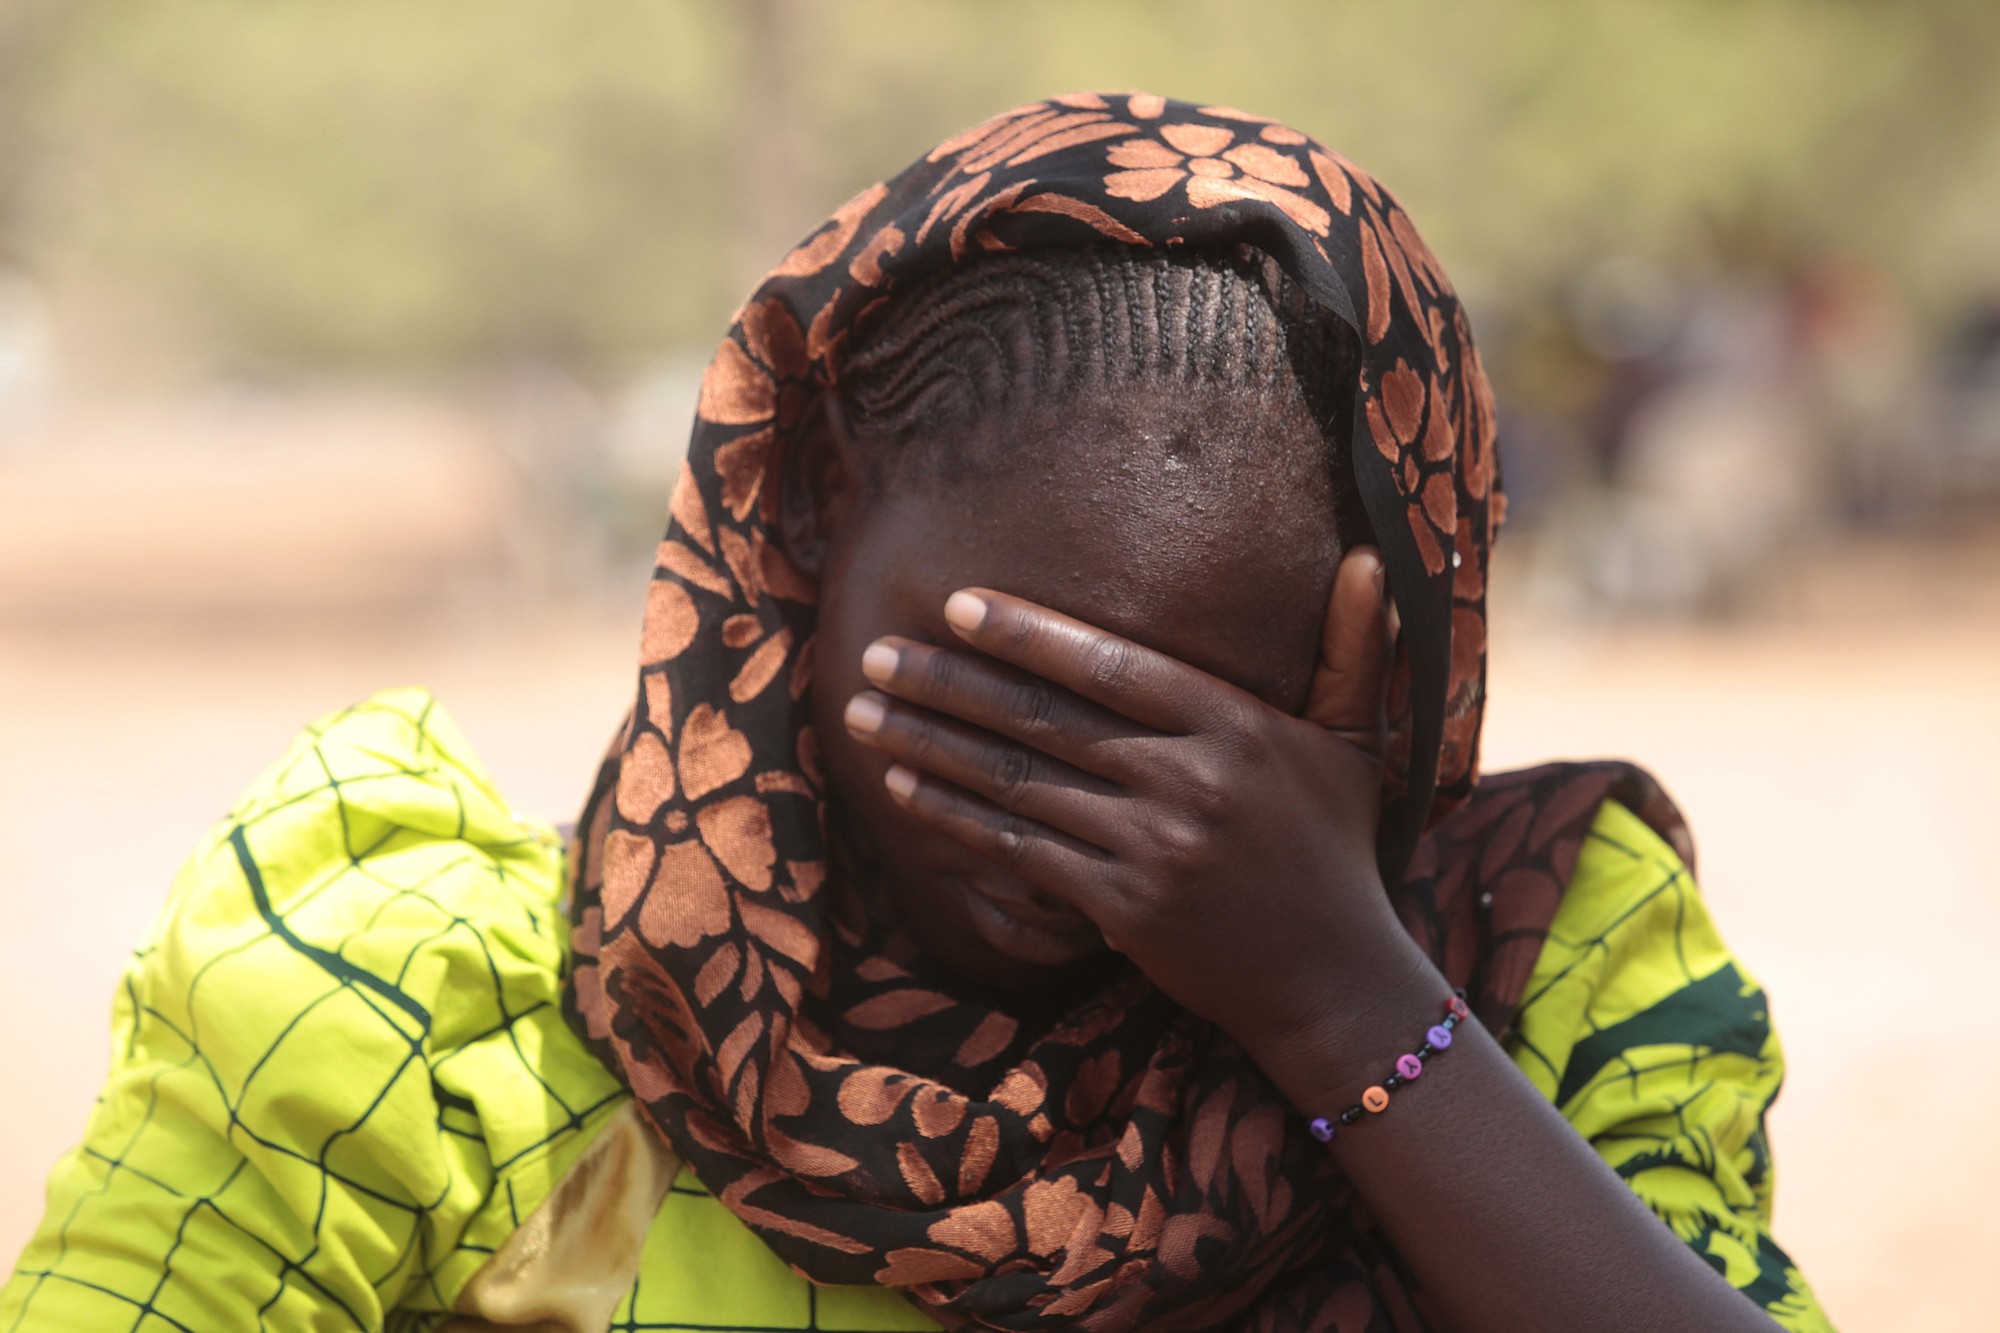 Dorcas Aiden, 20, speaks to a journalist Jan. 31 in Yola, Nigeria. She was taken by Boko Haram fighters and held captive for two weeks in September but was able to escape.